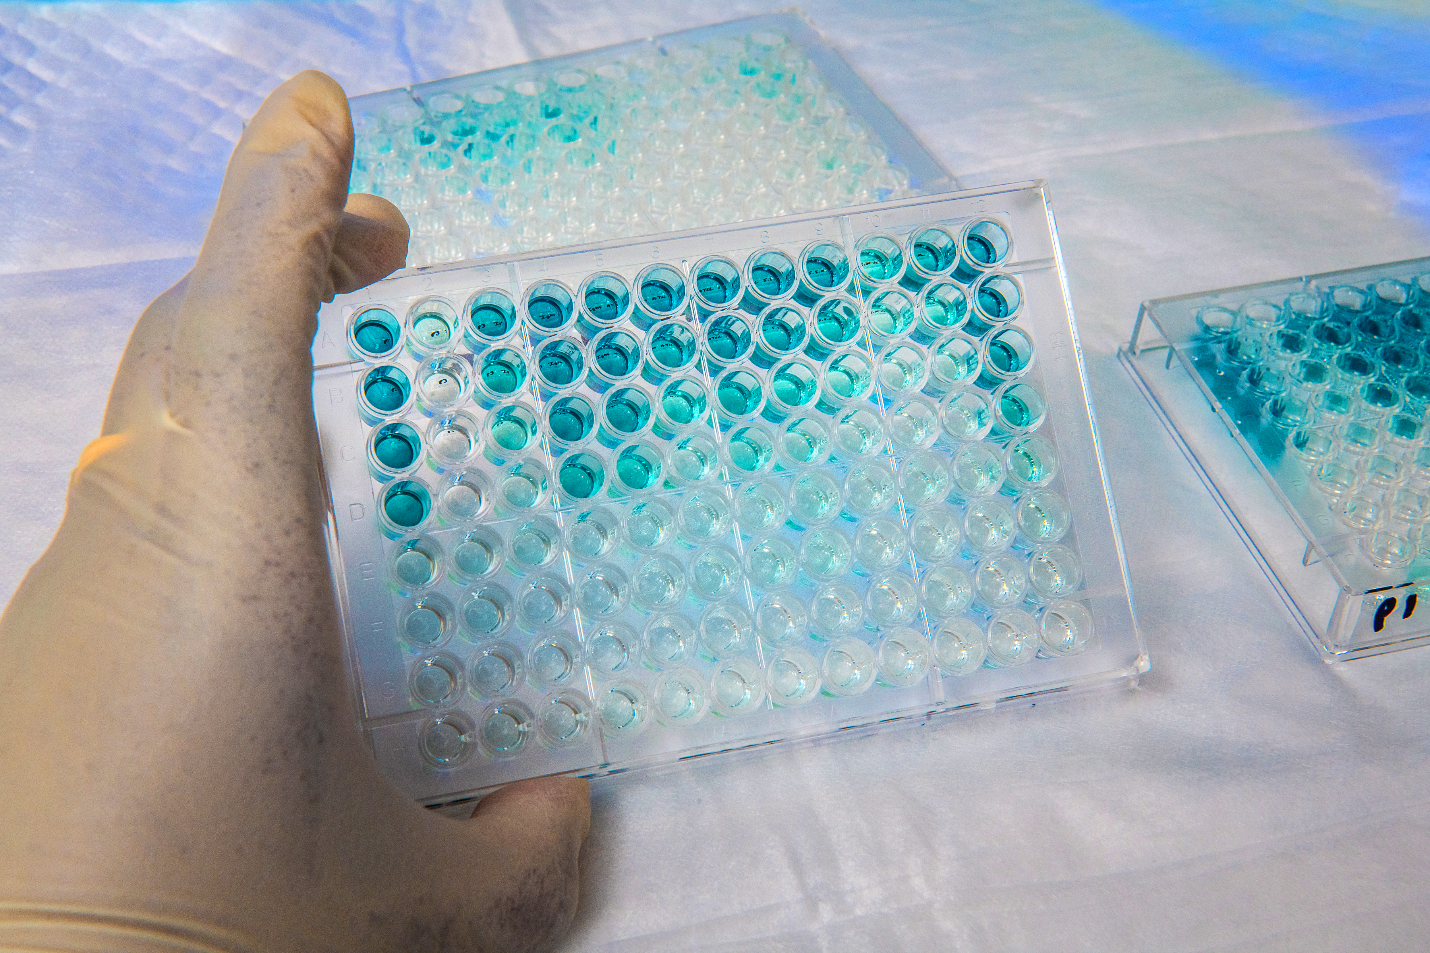 "A gloved hand holds a 96-microwell plate containing patient serum samples that are being tested for the presence of SARS-CoV-2 antibodies in a CDC serologic test."